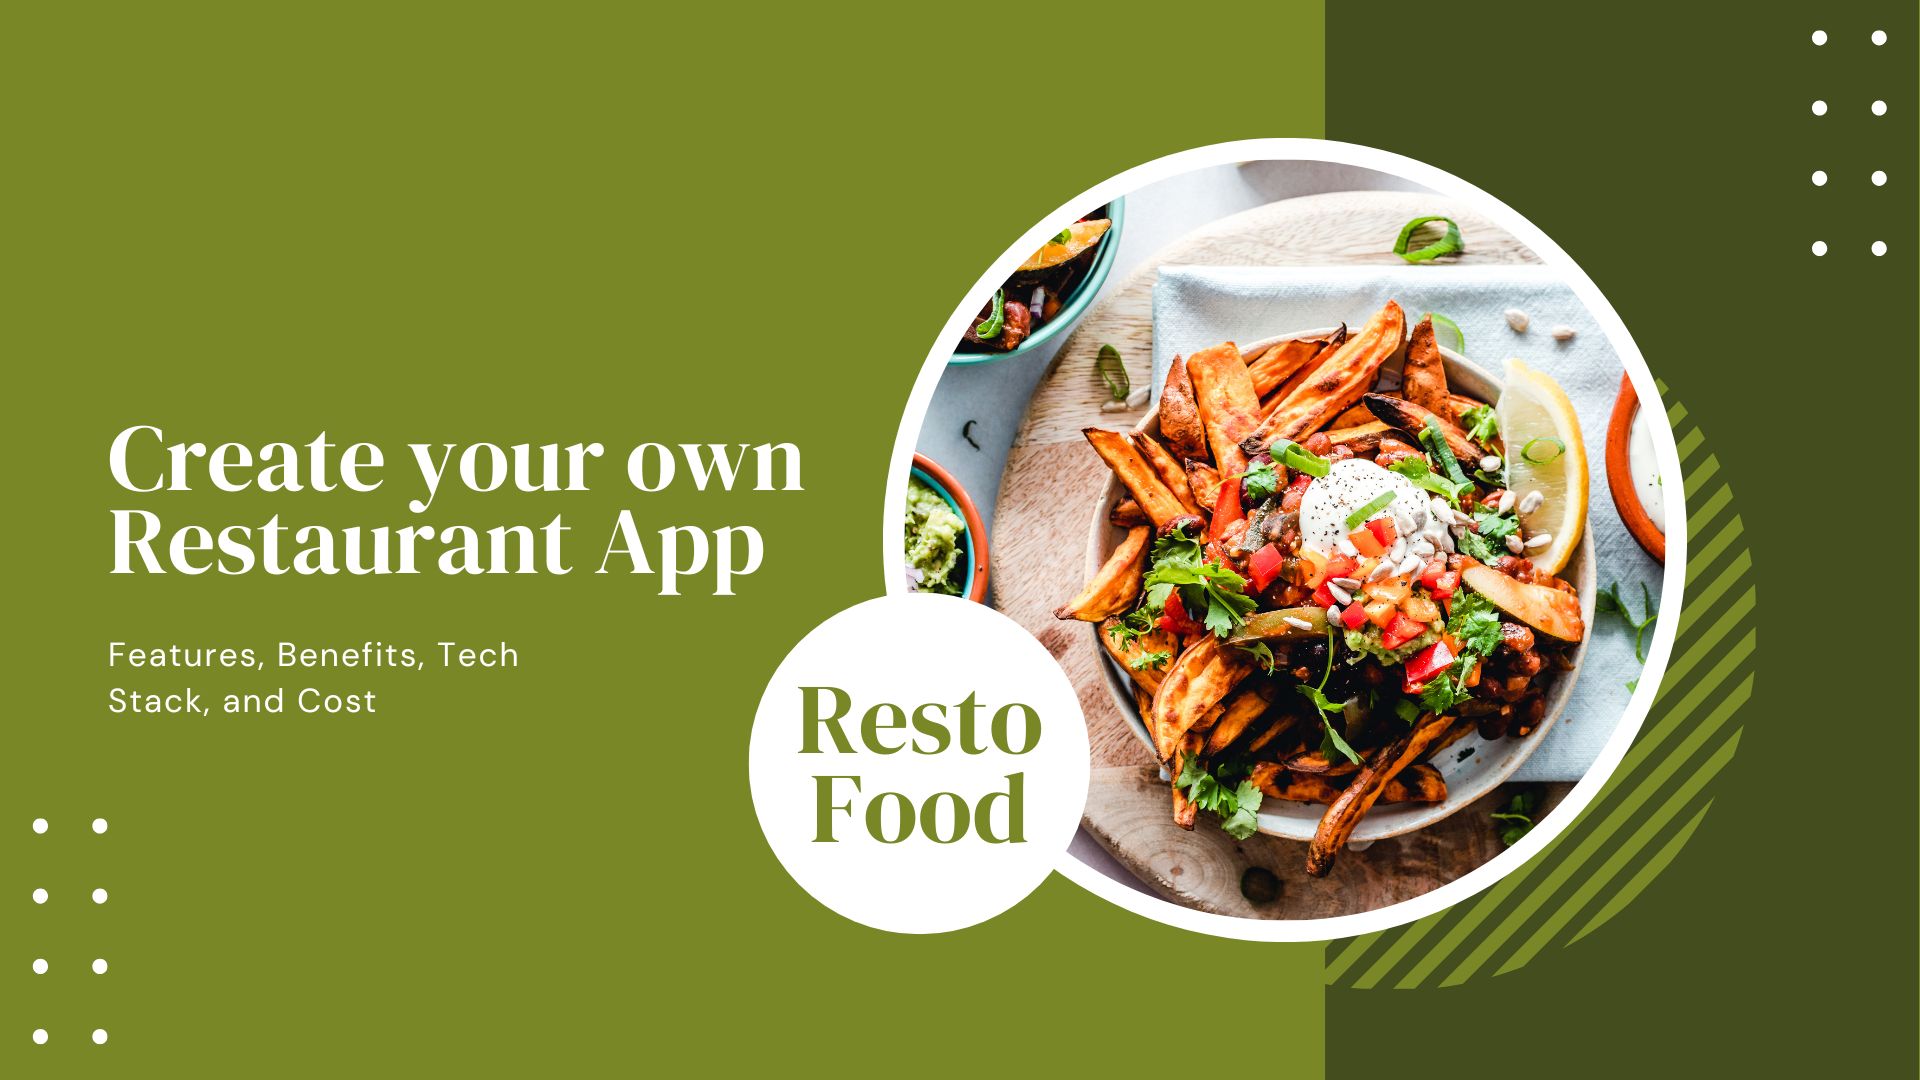 Create your own Restaurant App: Features, Benefits, Tech Stack, and Cost